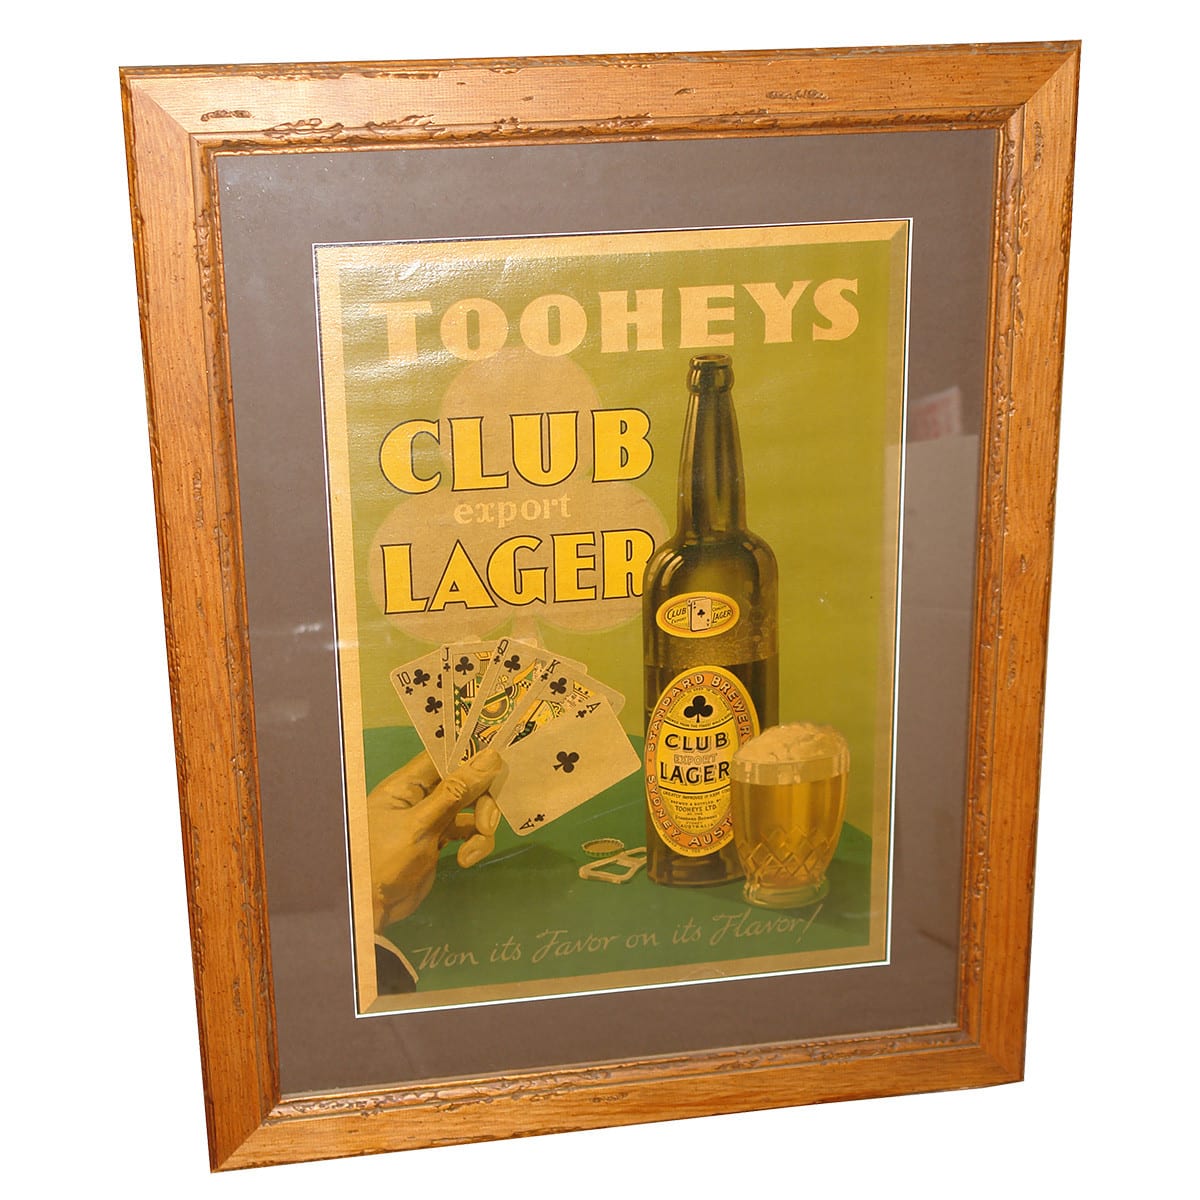 Beer Advertising Sign. Tooheys Club Export Lager. Standard Brewery Sydney. Bottle and Cards. (New South Wales)